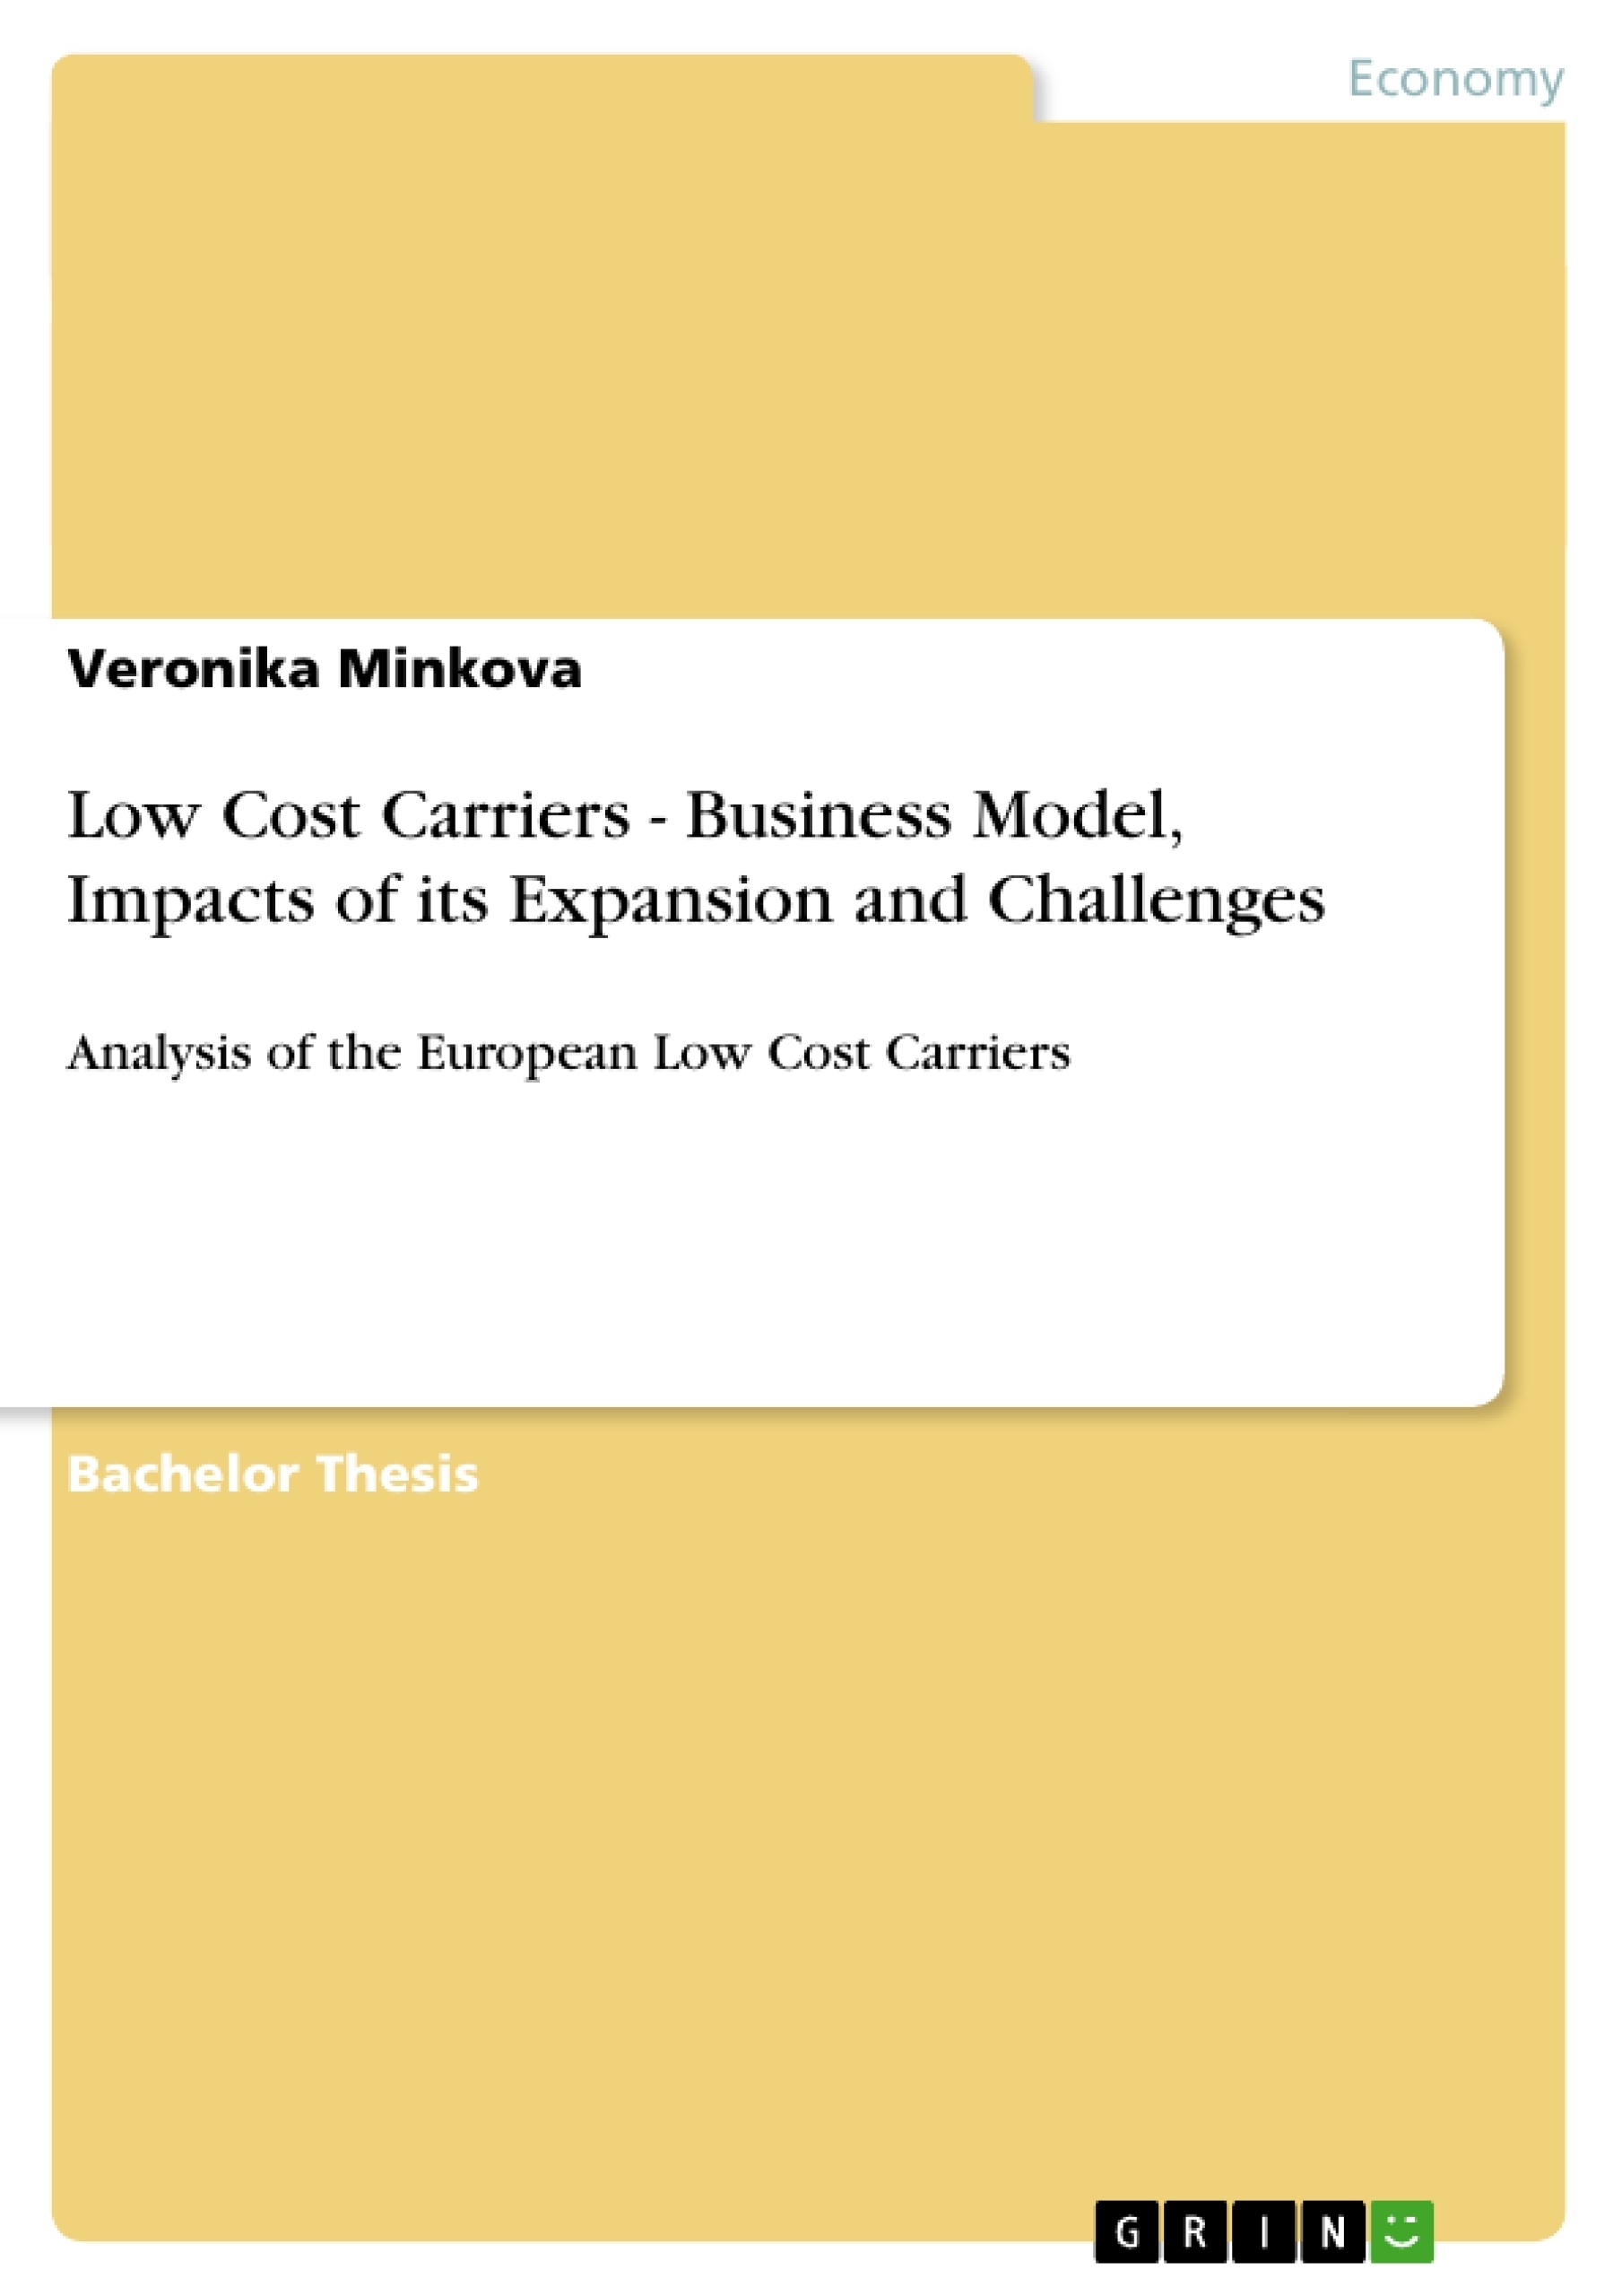 Title: Low Cost Carriers - Business Model, Impacts of its Expansion and Challenges